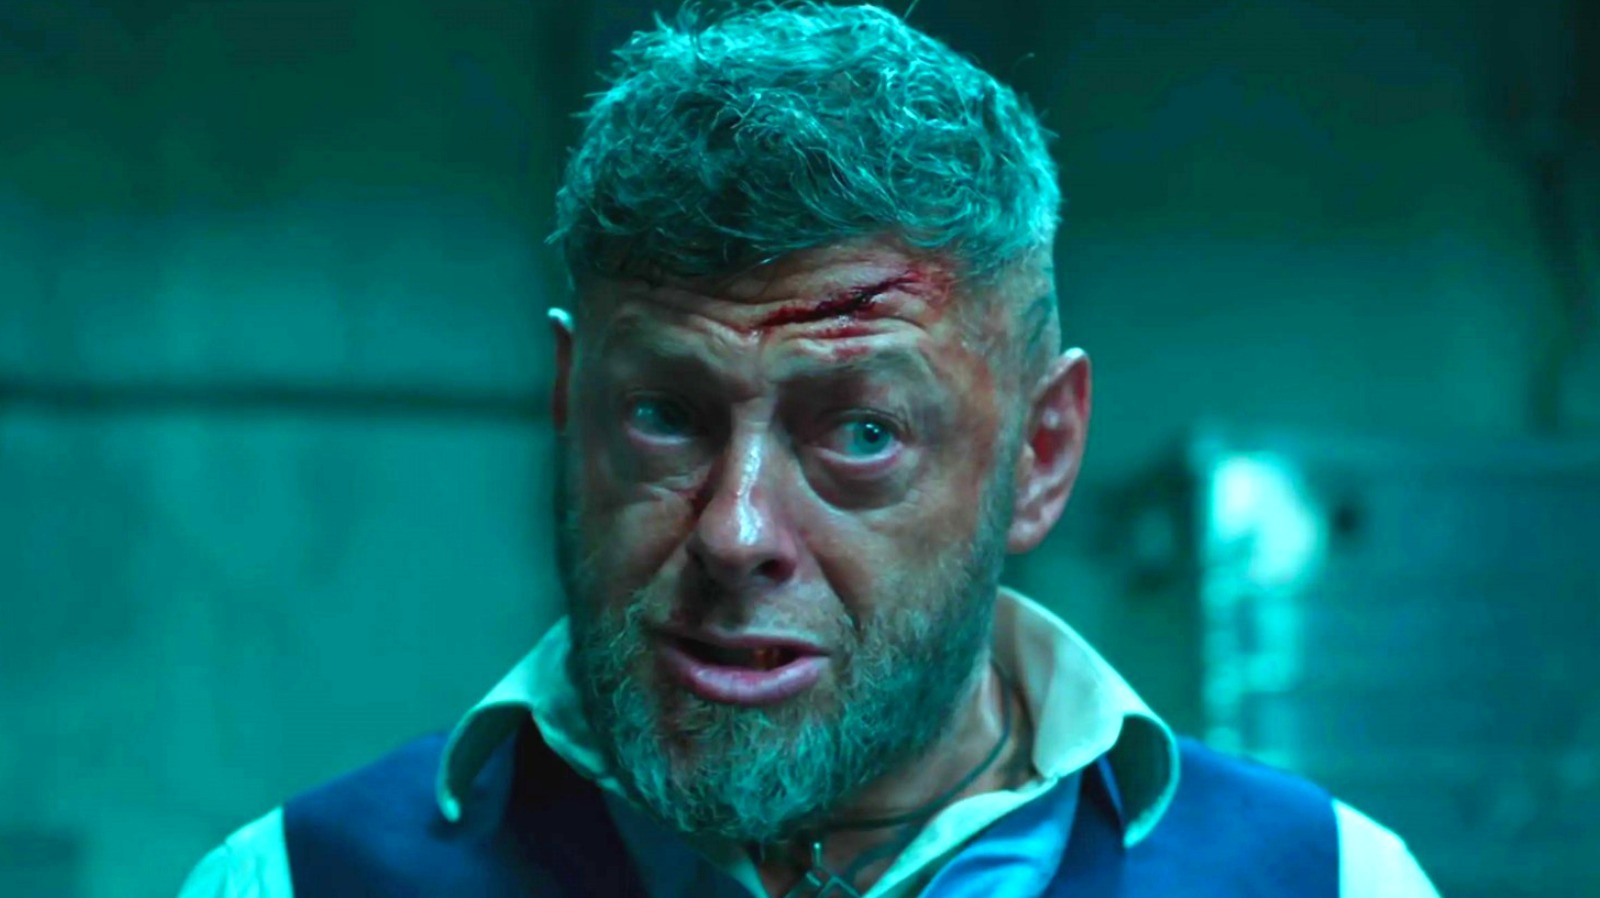 Black Panther actor Andy Serkis is excited to reunite with his filmmaking family in New Zealand for The Hunt for Gollum